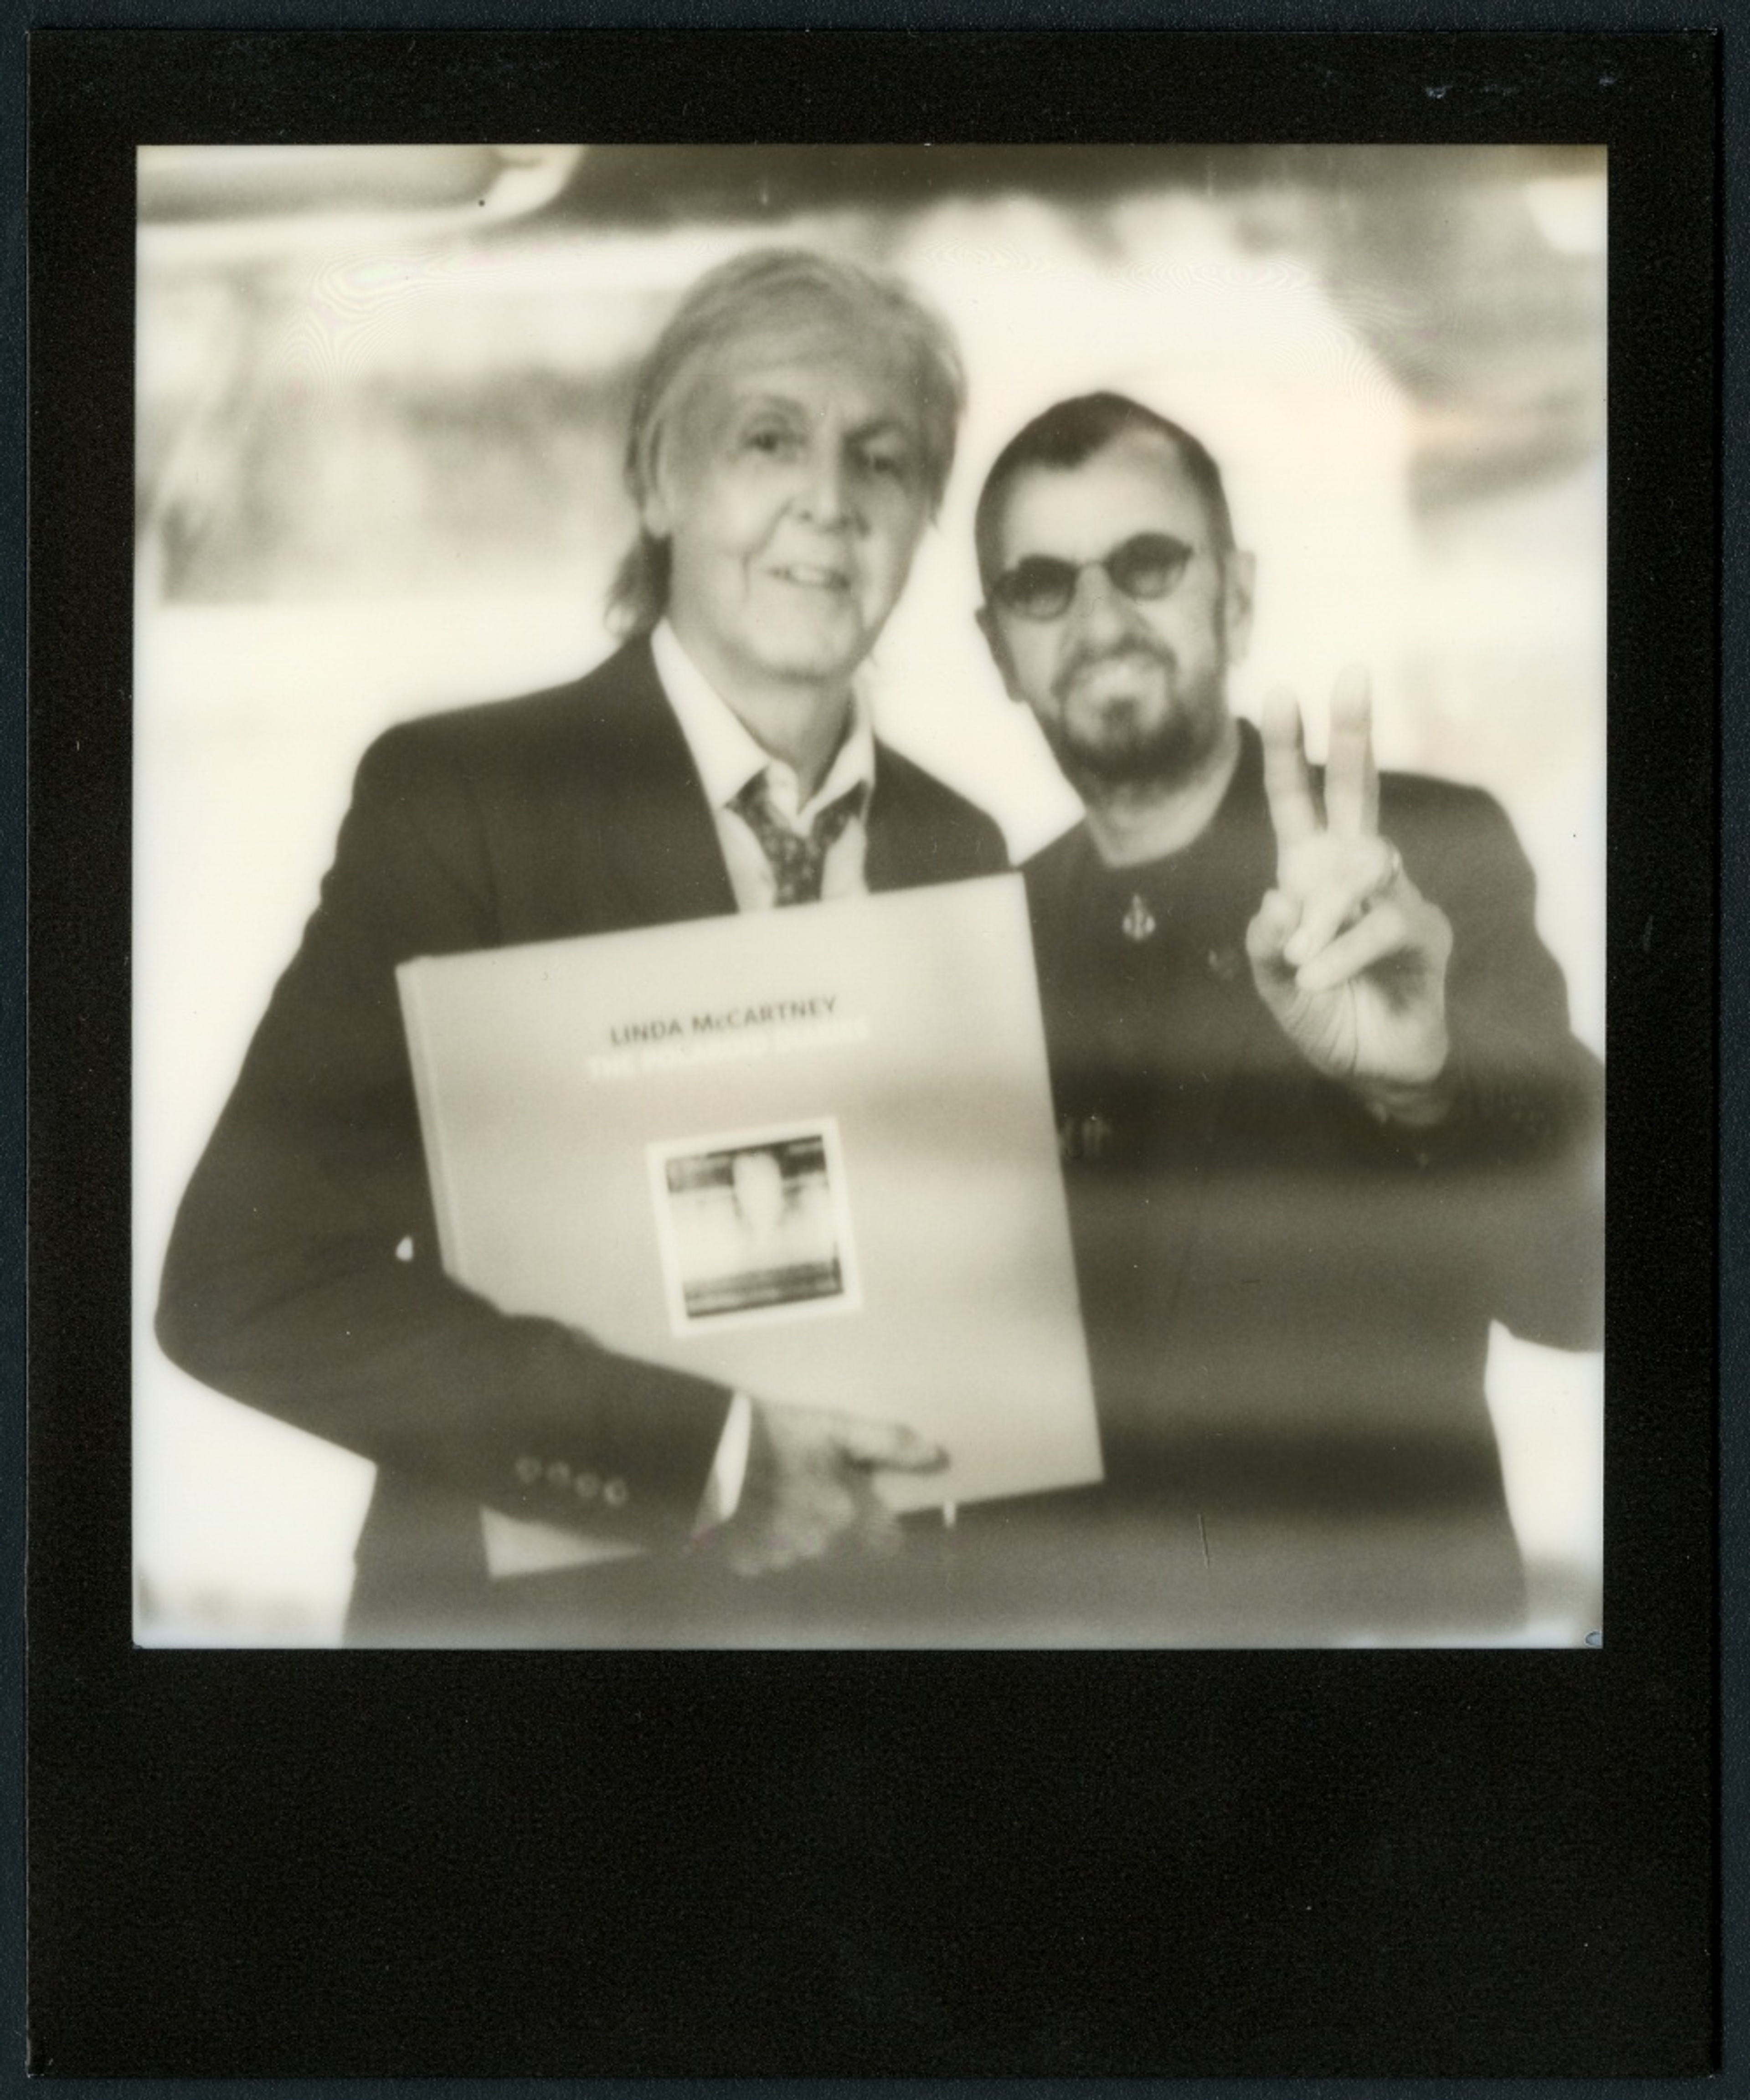 Paul is joined by Ringo Starr to celebrate the launch of 'Linda McCartney: The Polaroid Diaries' at the V&A Museum, London.